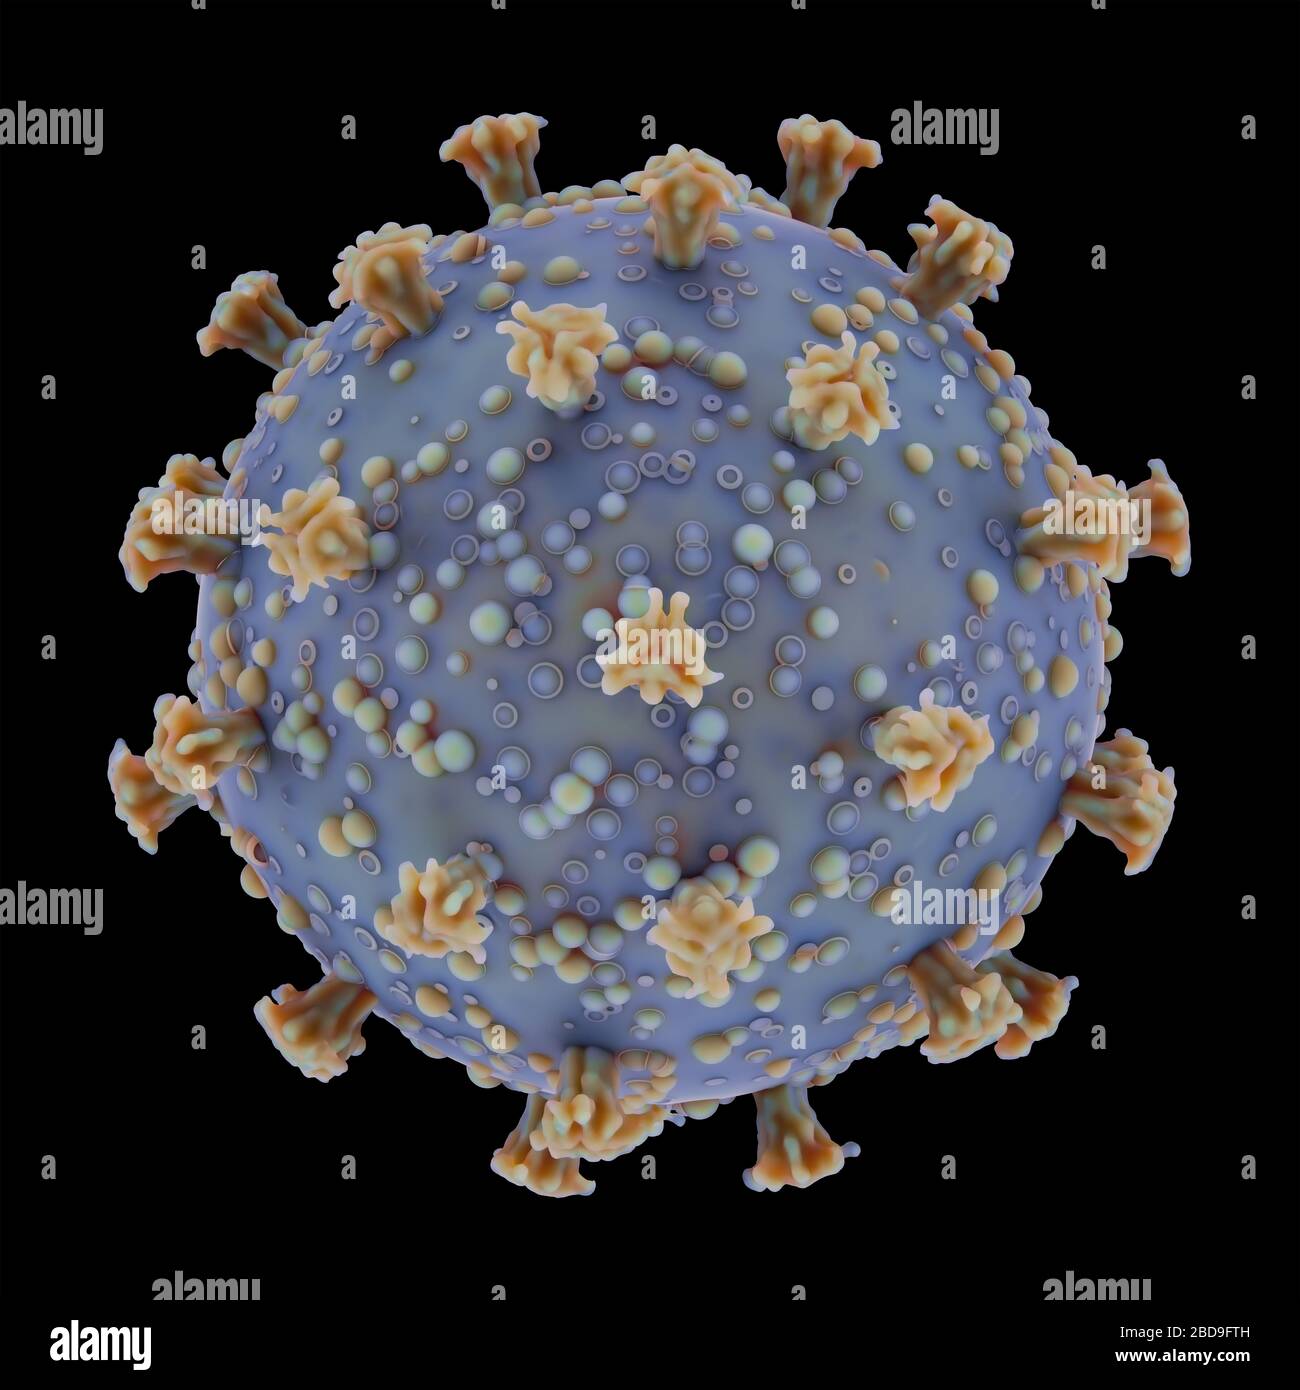 Virus conceptual with clipping path included. The structure of a virus. Covid-19, Coronavirus and Influenza. 3D illustration. Stock Photo